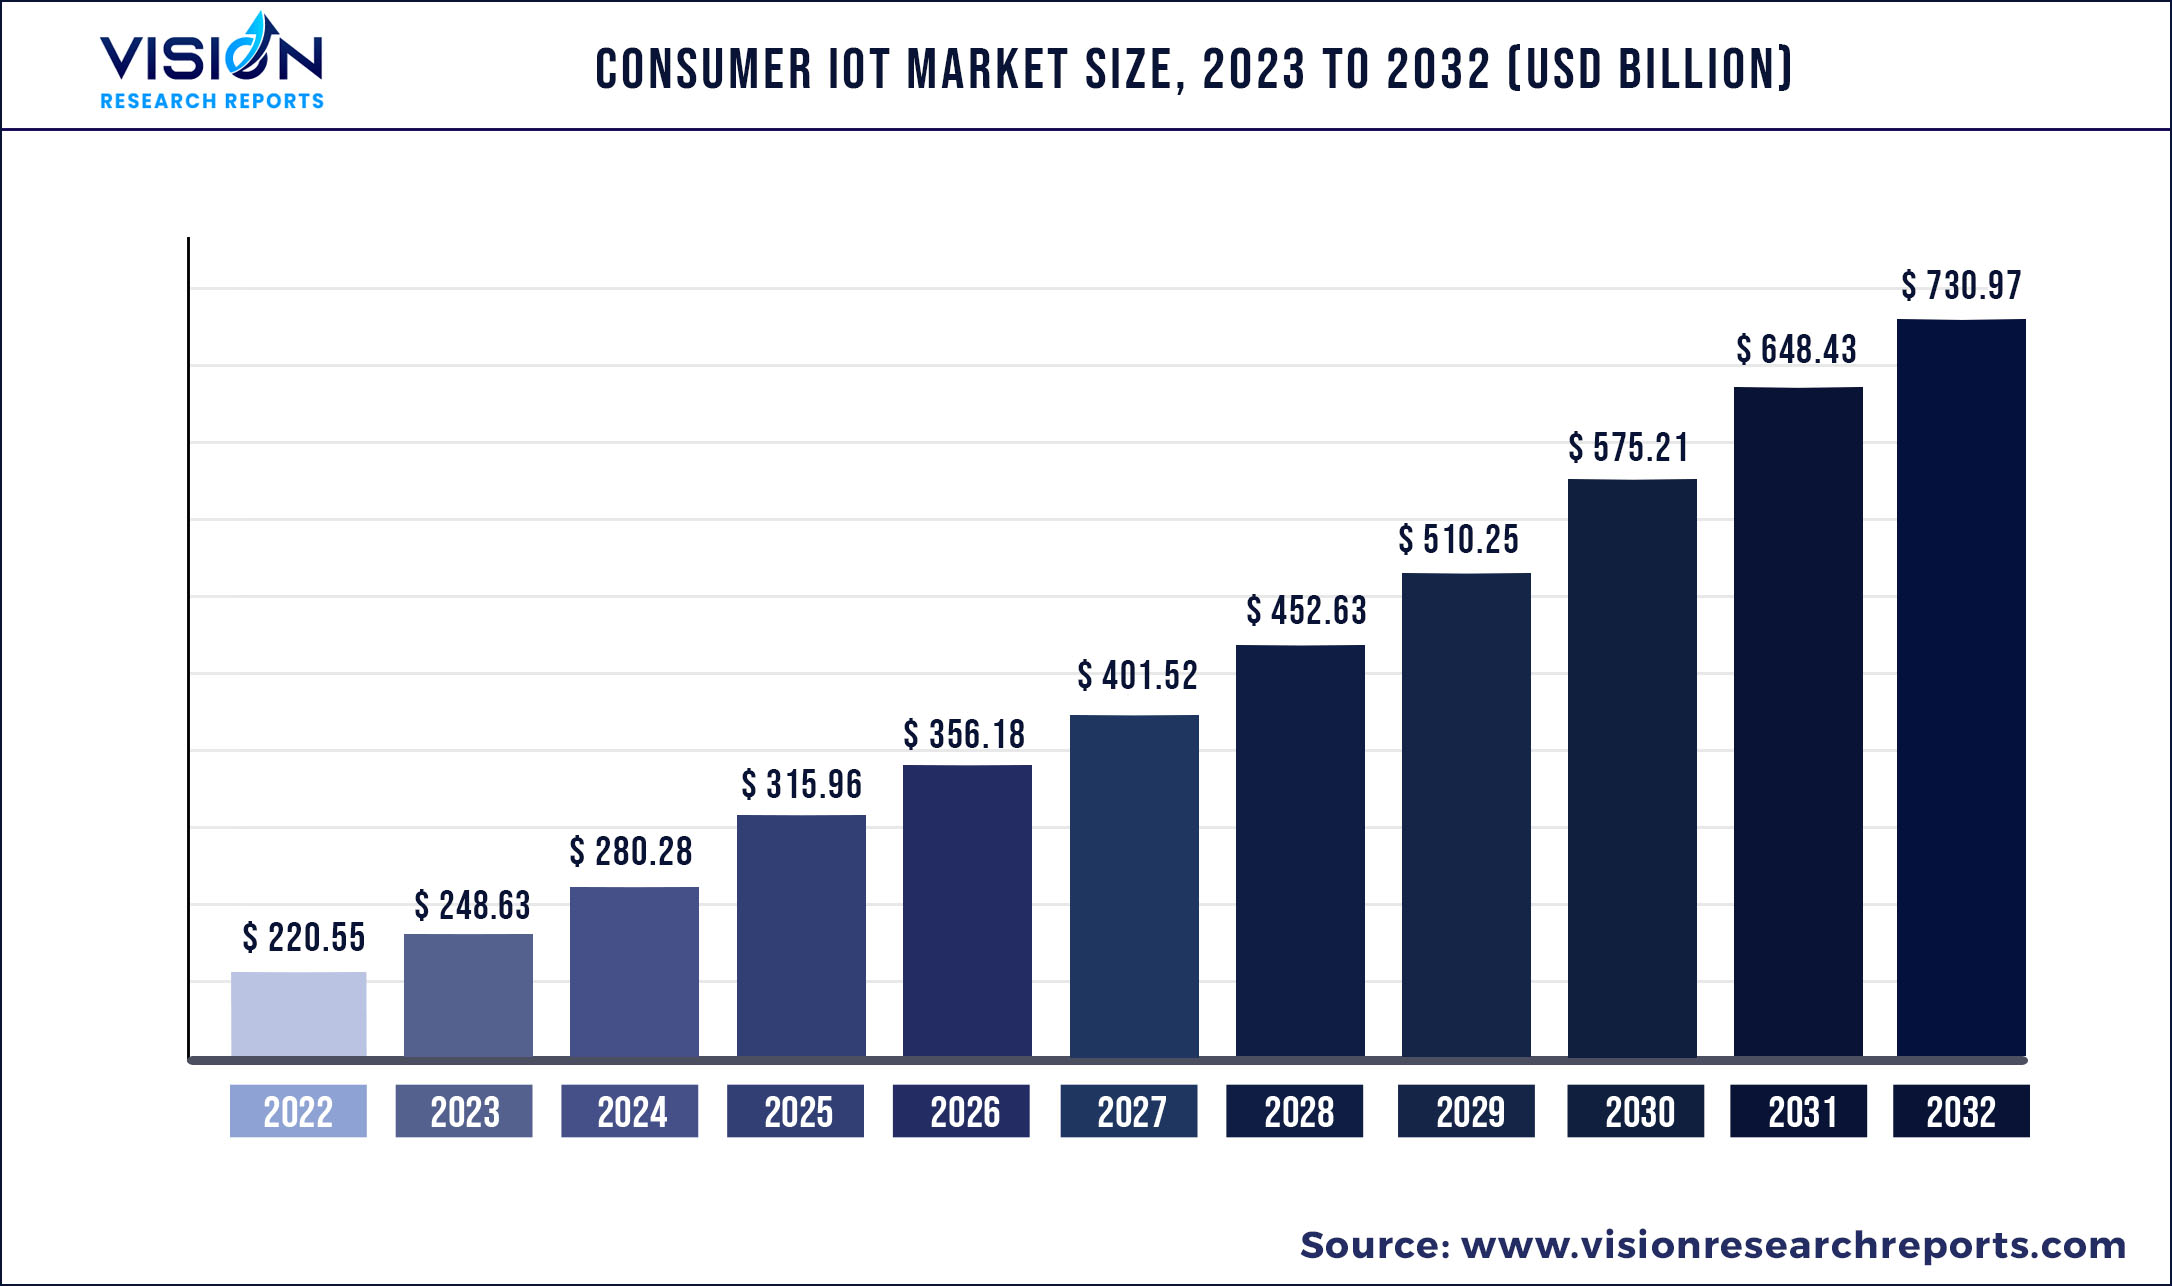 Consumer IoT Market Size 2023 to 2032